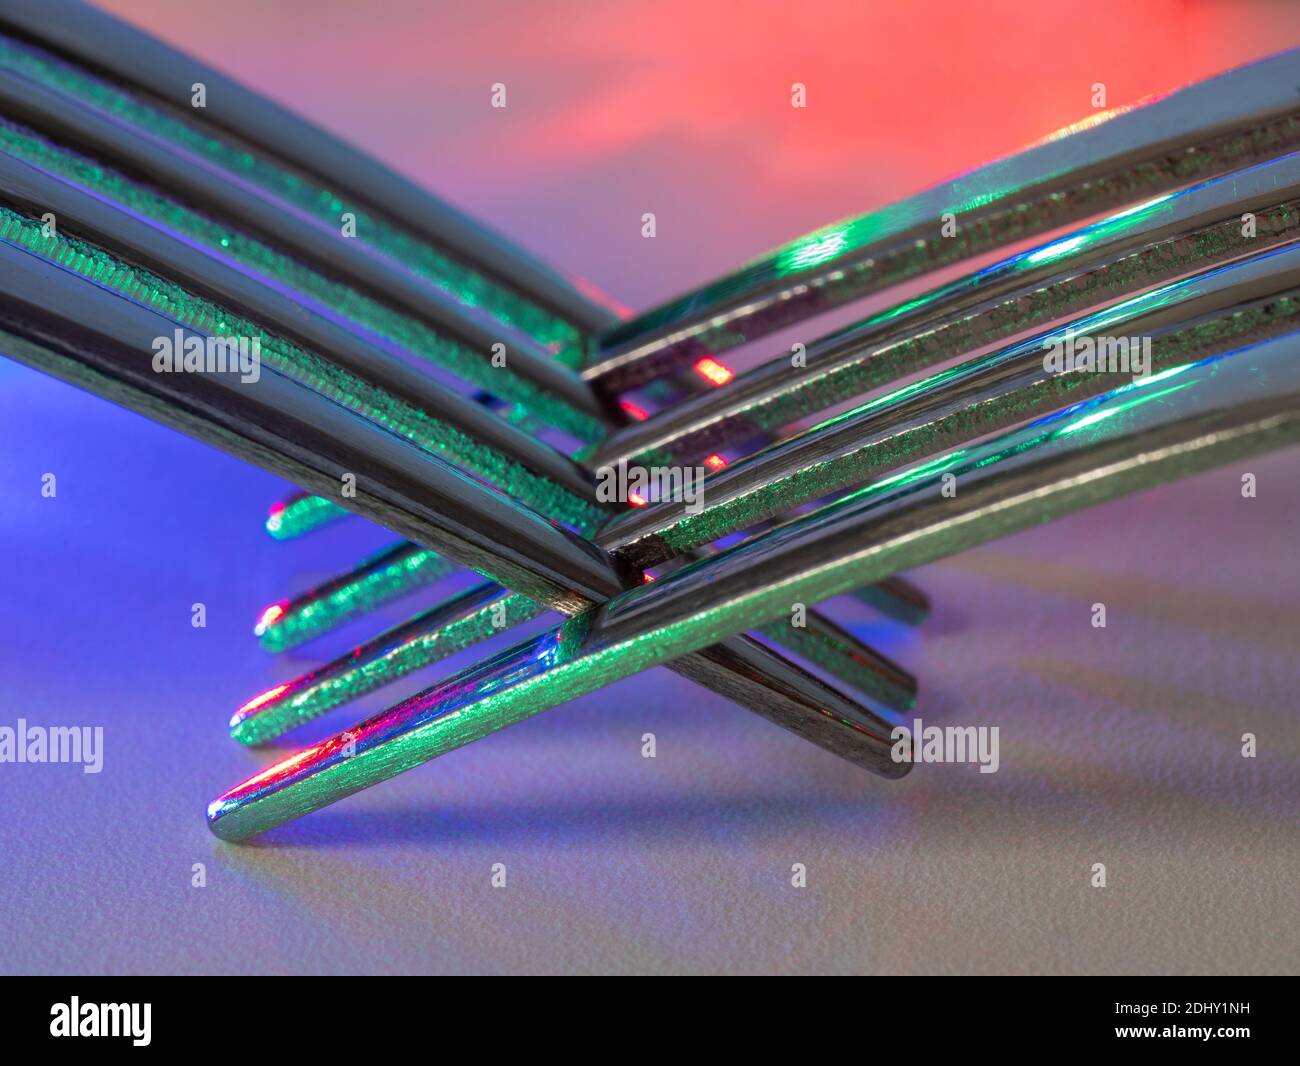 Abstract reflections of colored light in fork tines Stock Photo